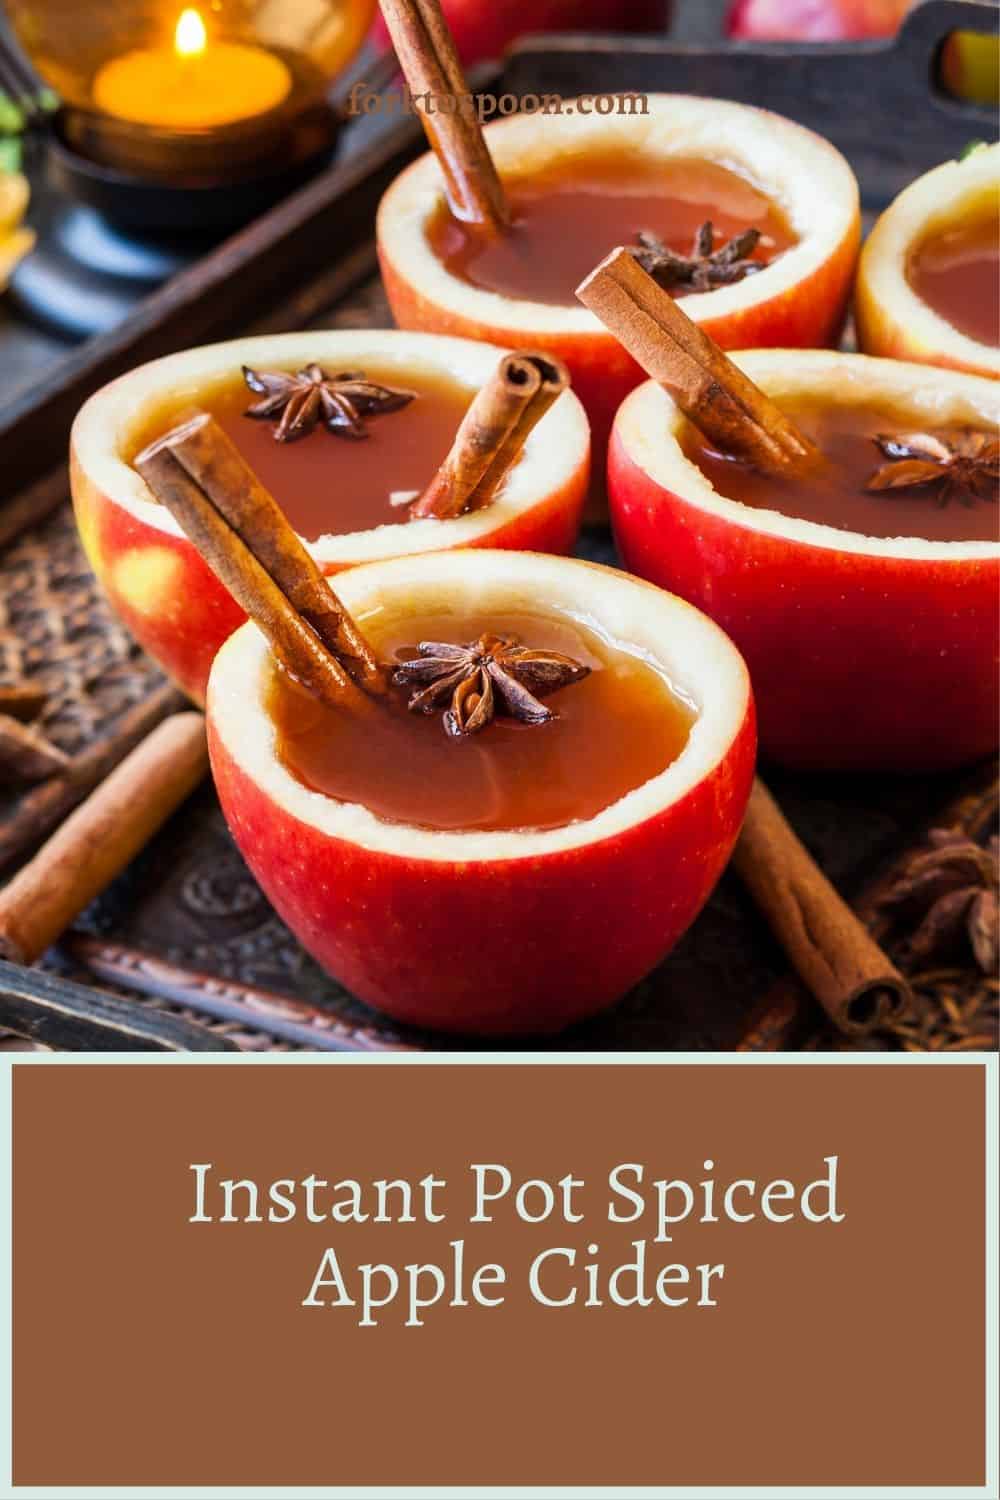 Instant Pot Spiced Apple Cider - Fork To Spoon